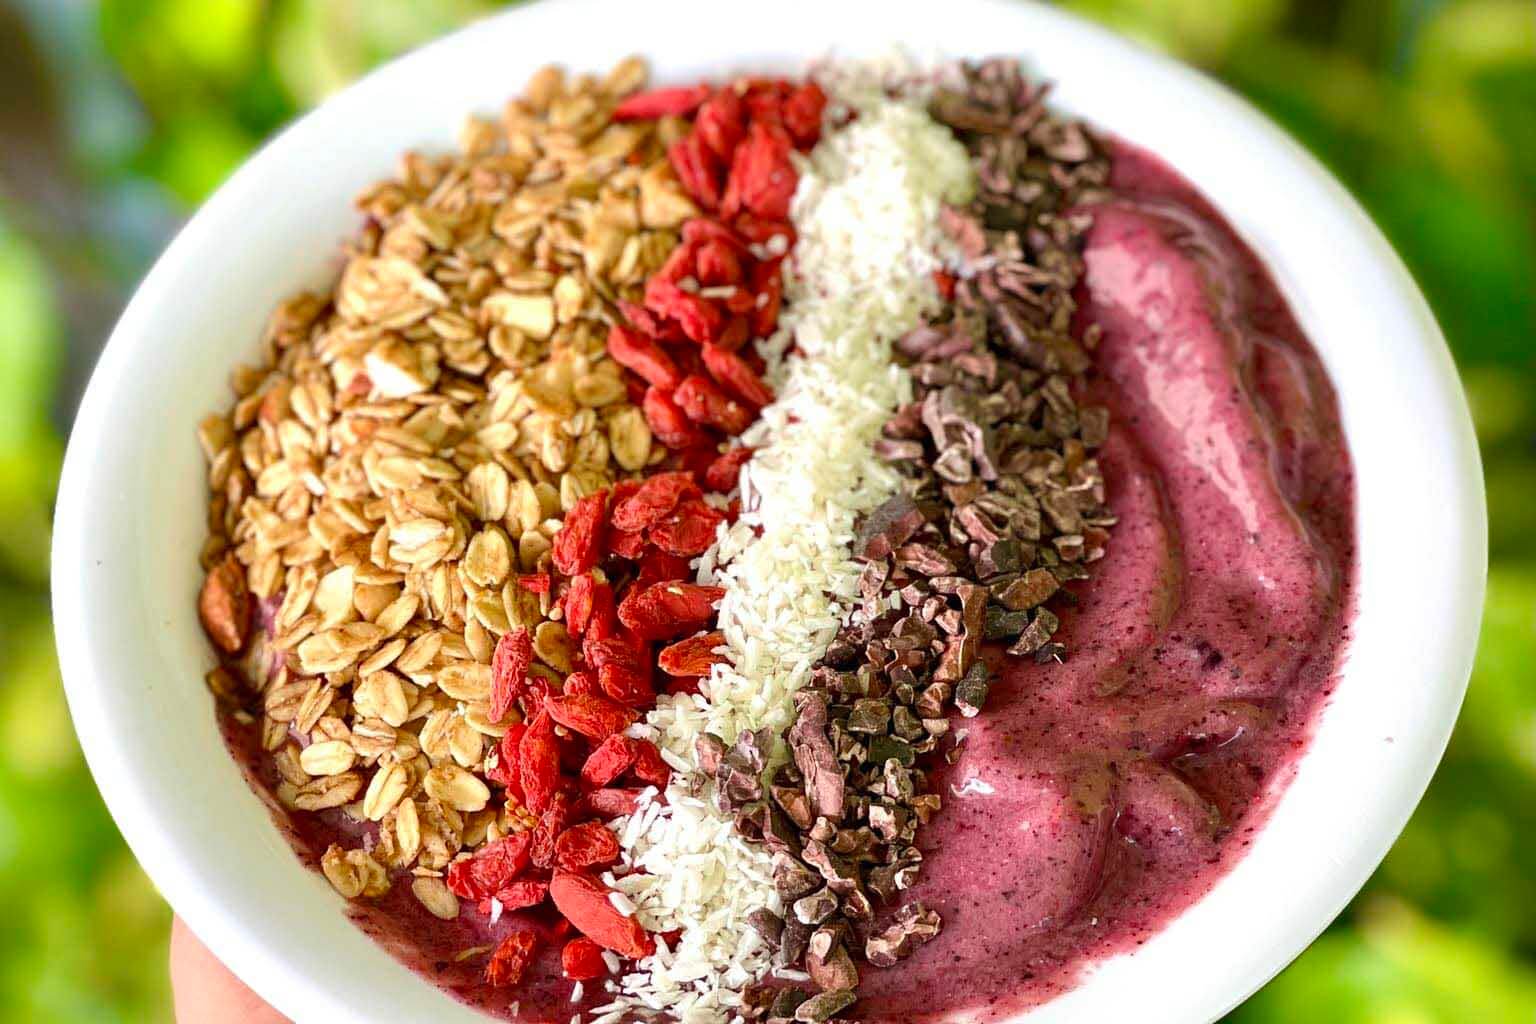 Date and Thyme Smoothie Bowl. 